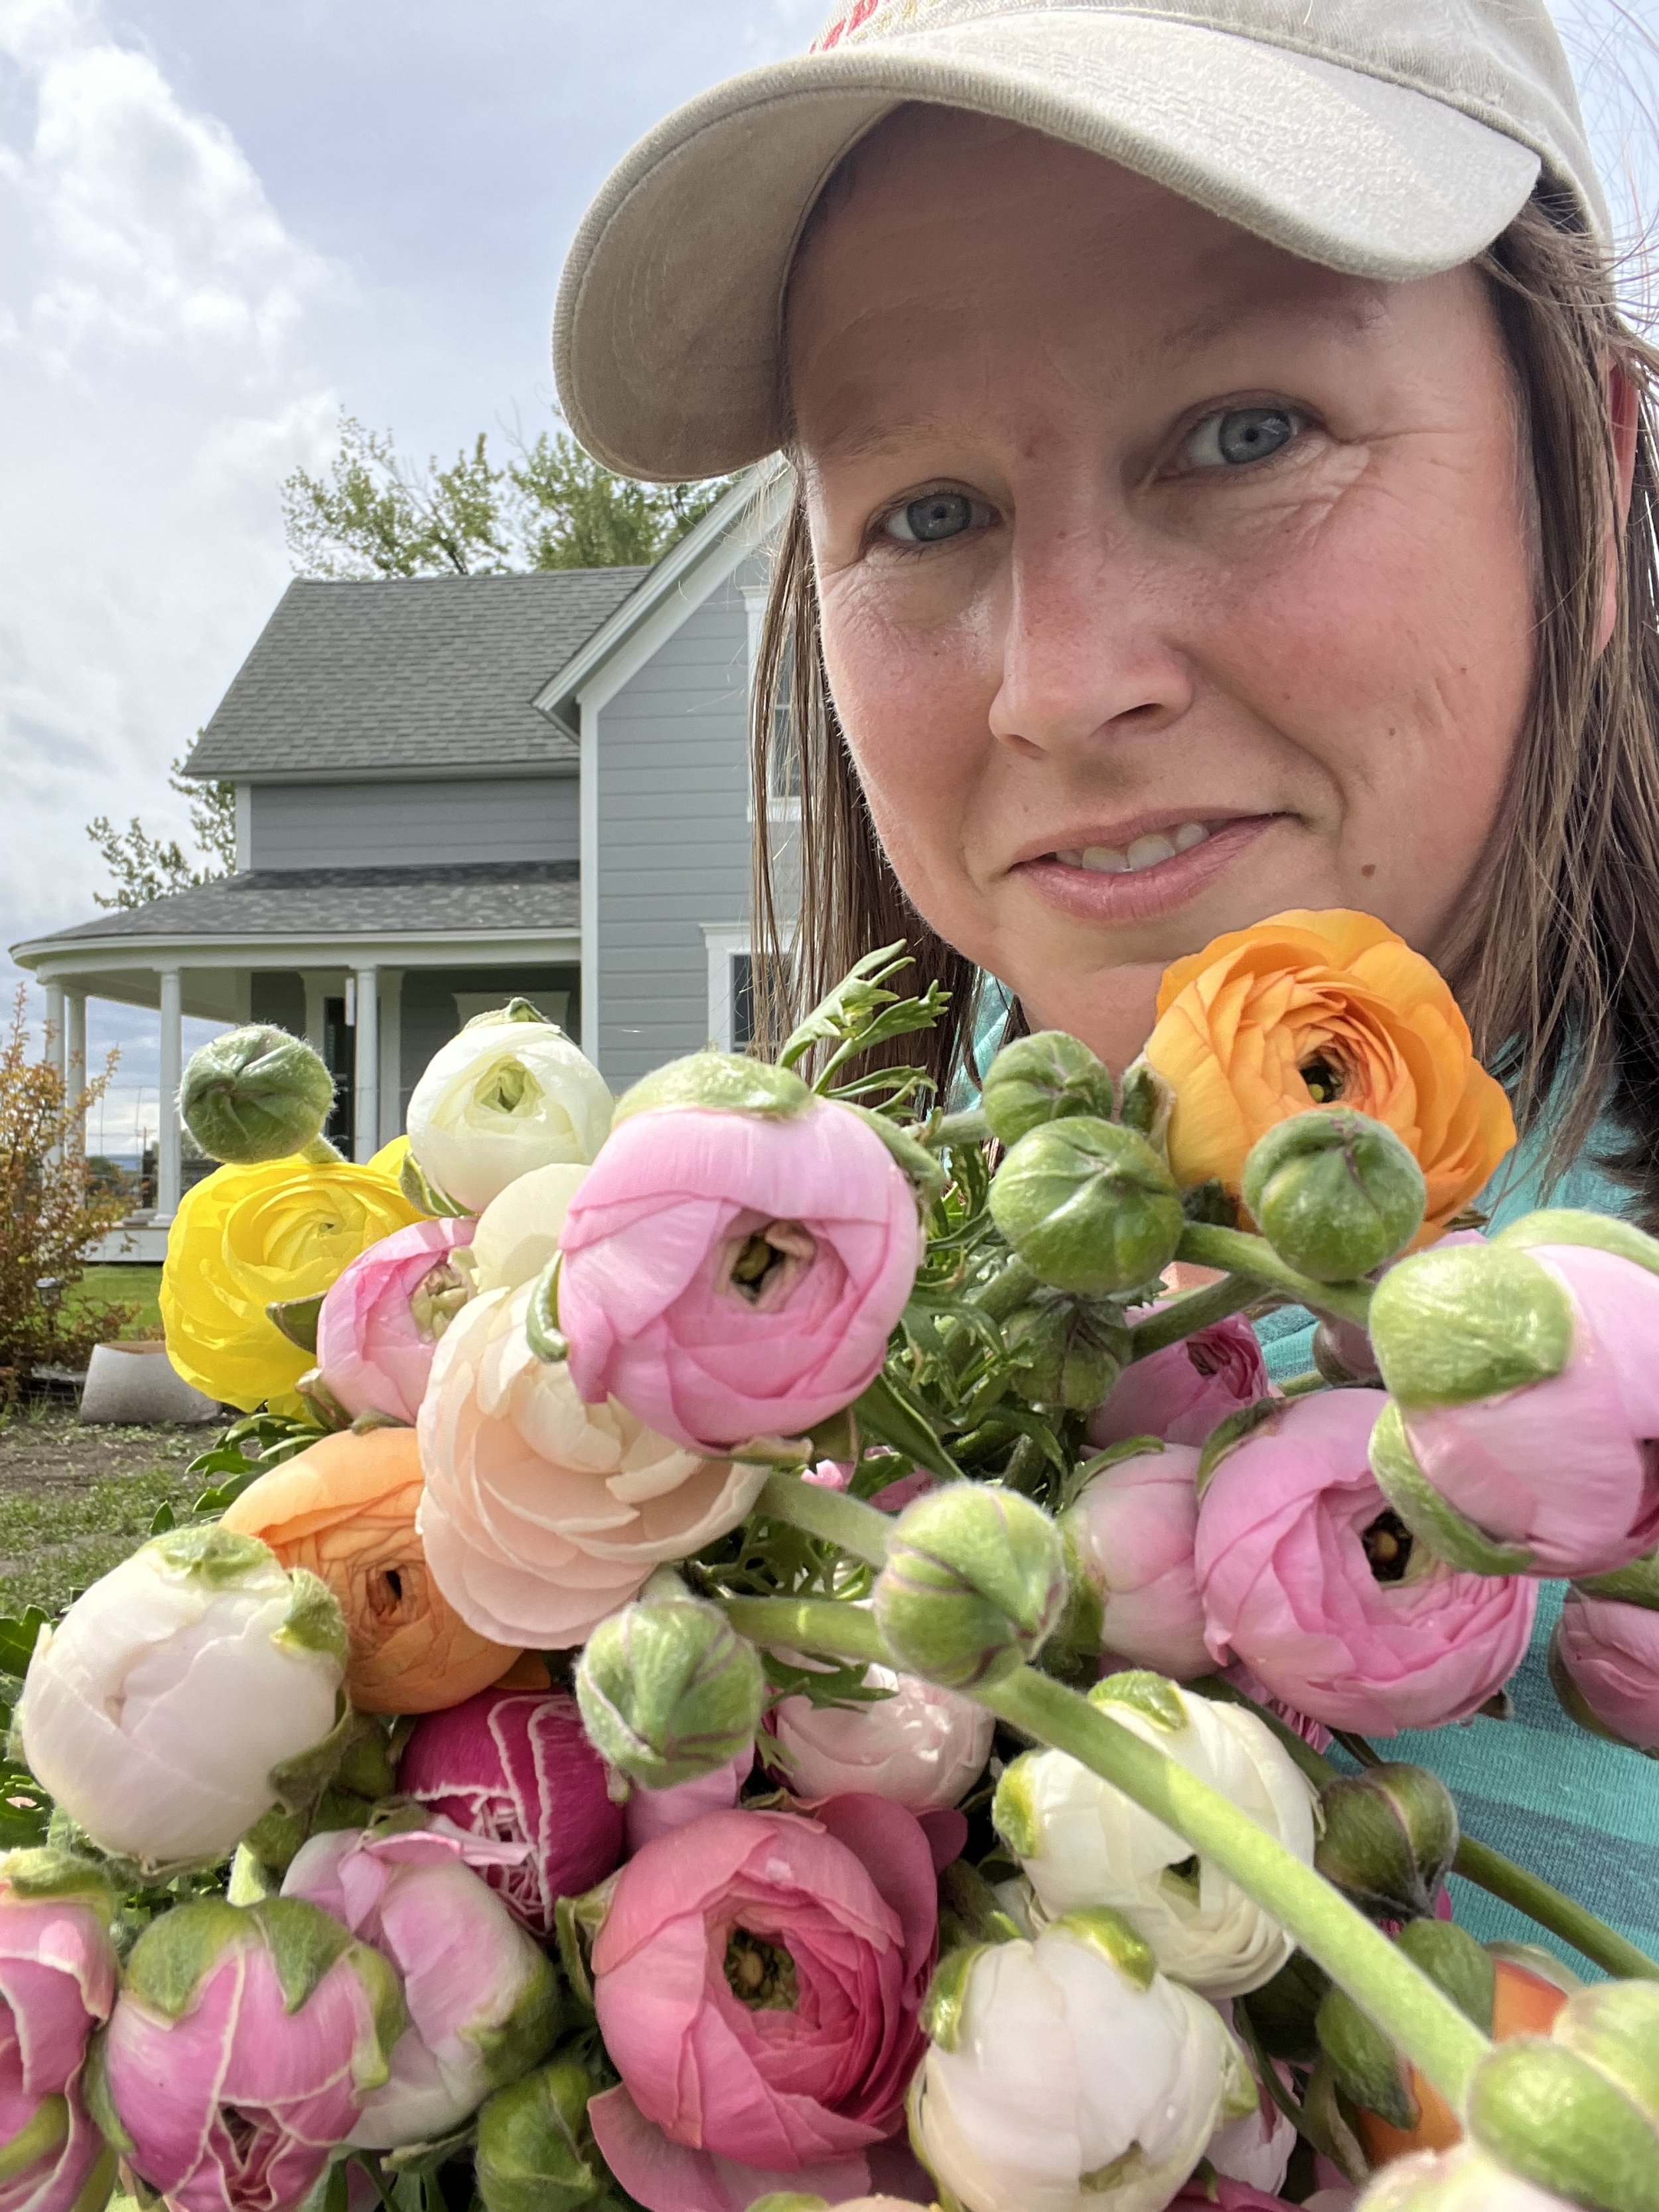 selfie with an armload of flowers